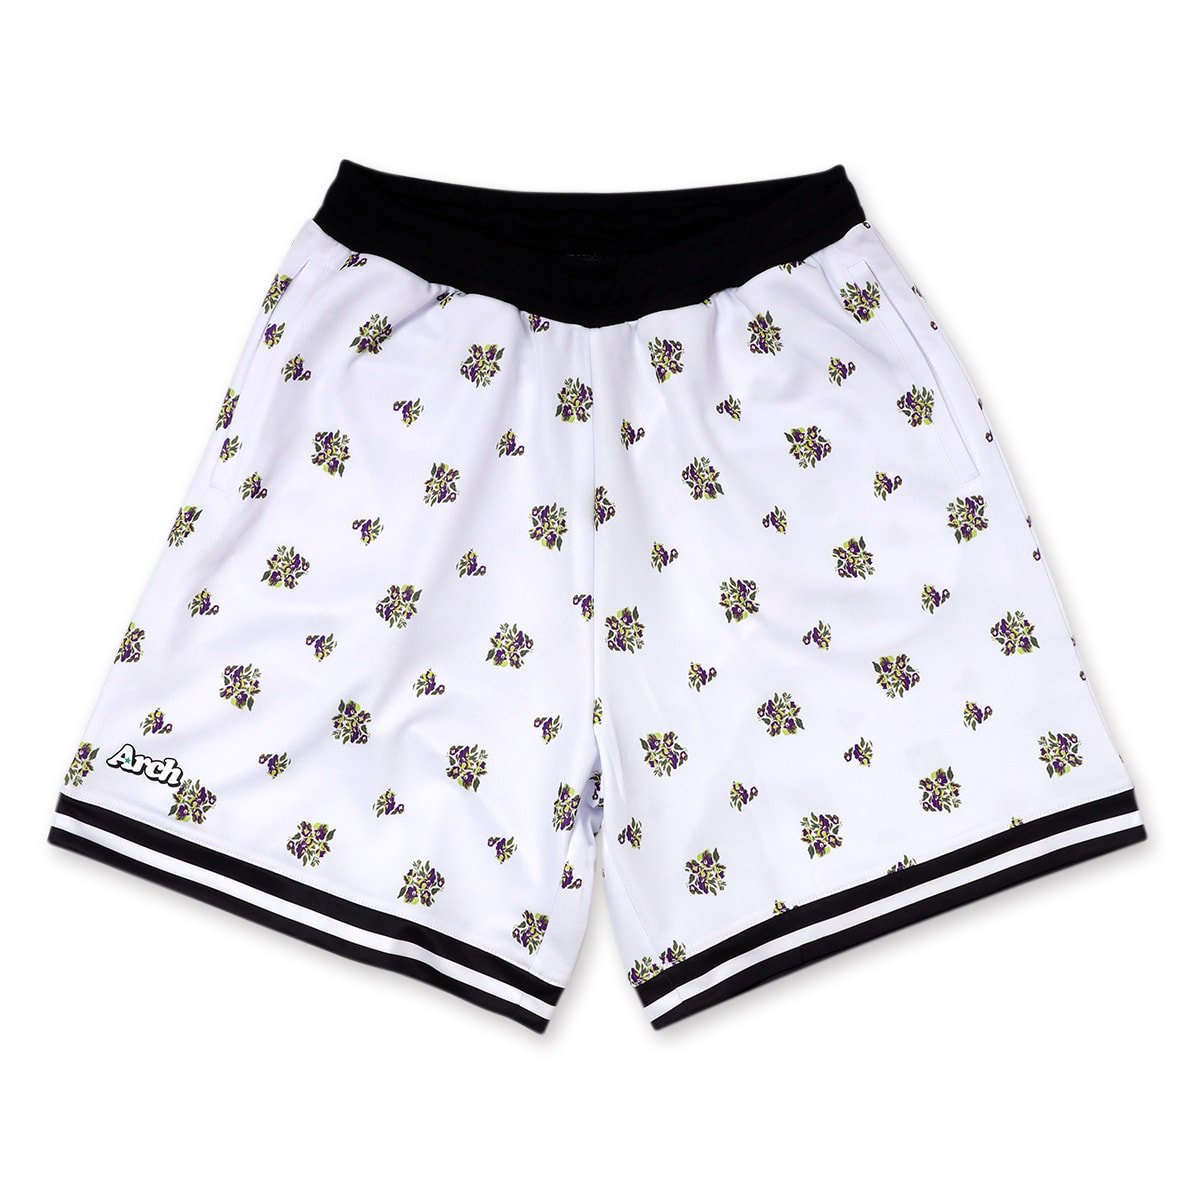 floral sport shorts【white】